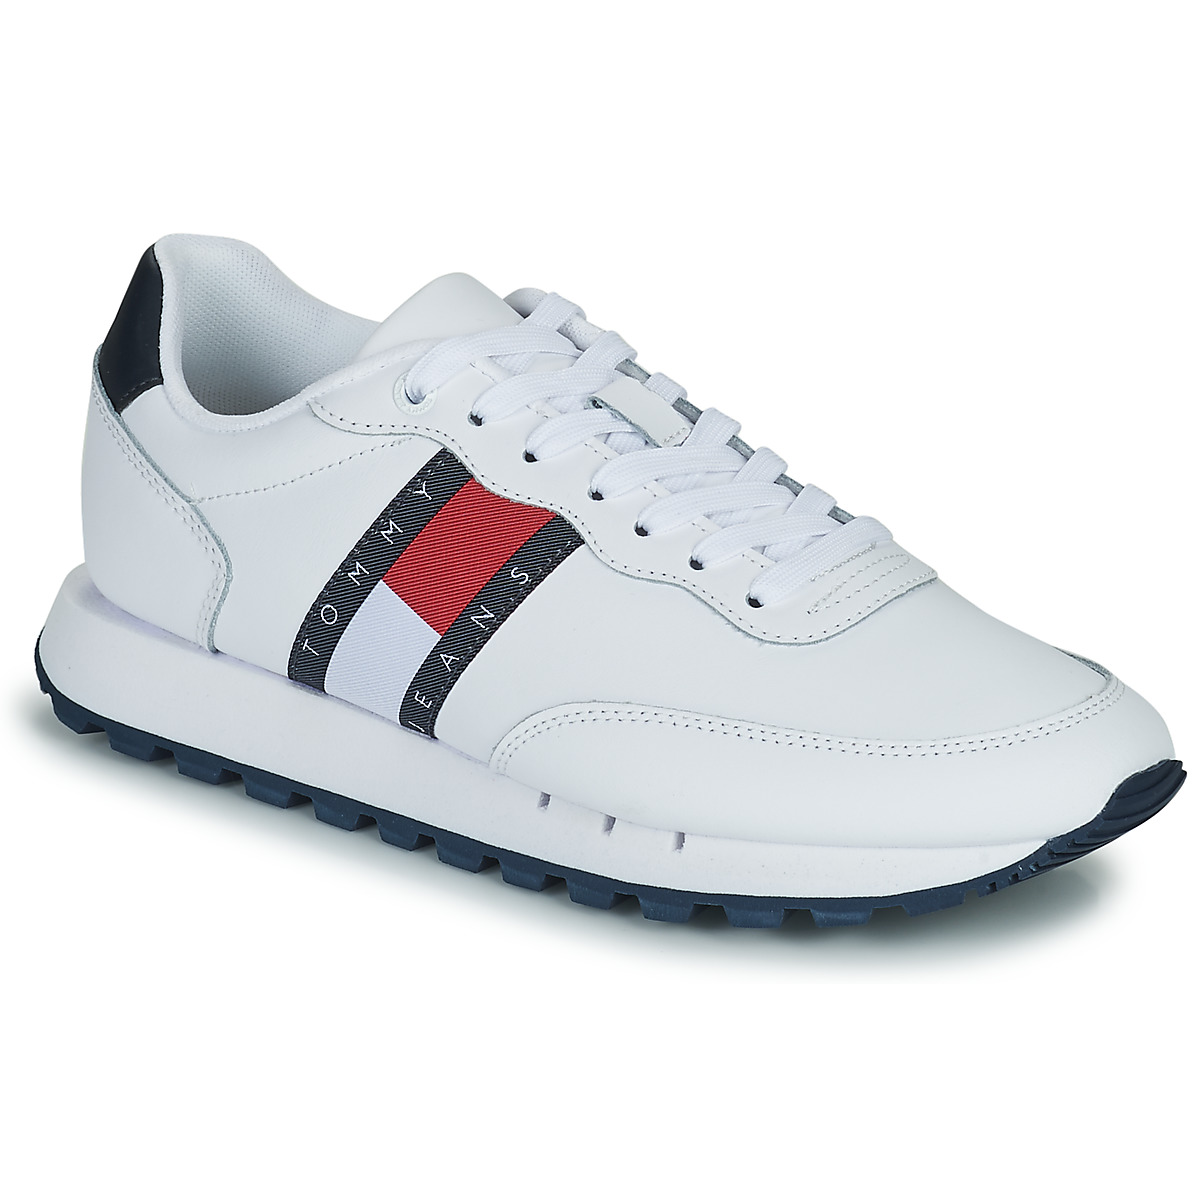 Chaussures Homme Tommy Jeans Felpa grigio chiaro bianco rosso nero TOMMY JEANS LEATHER RUNNER Blanc